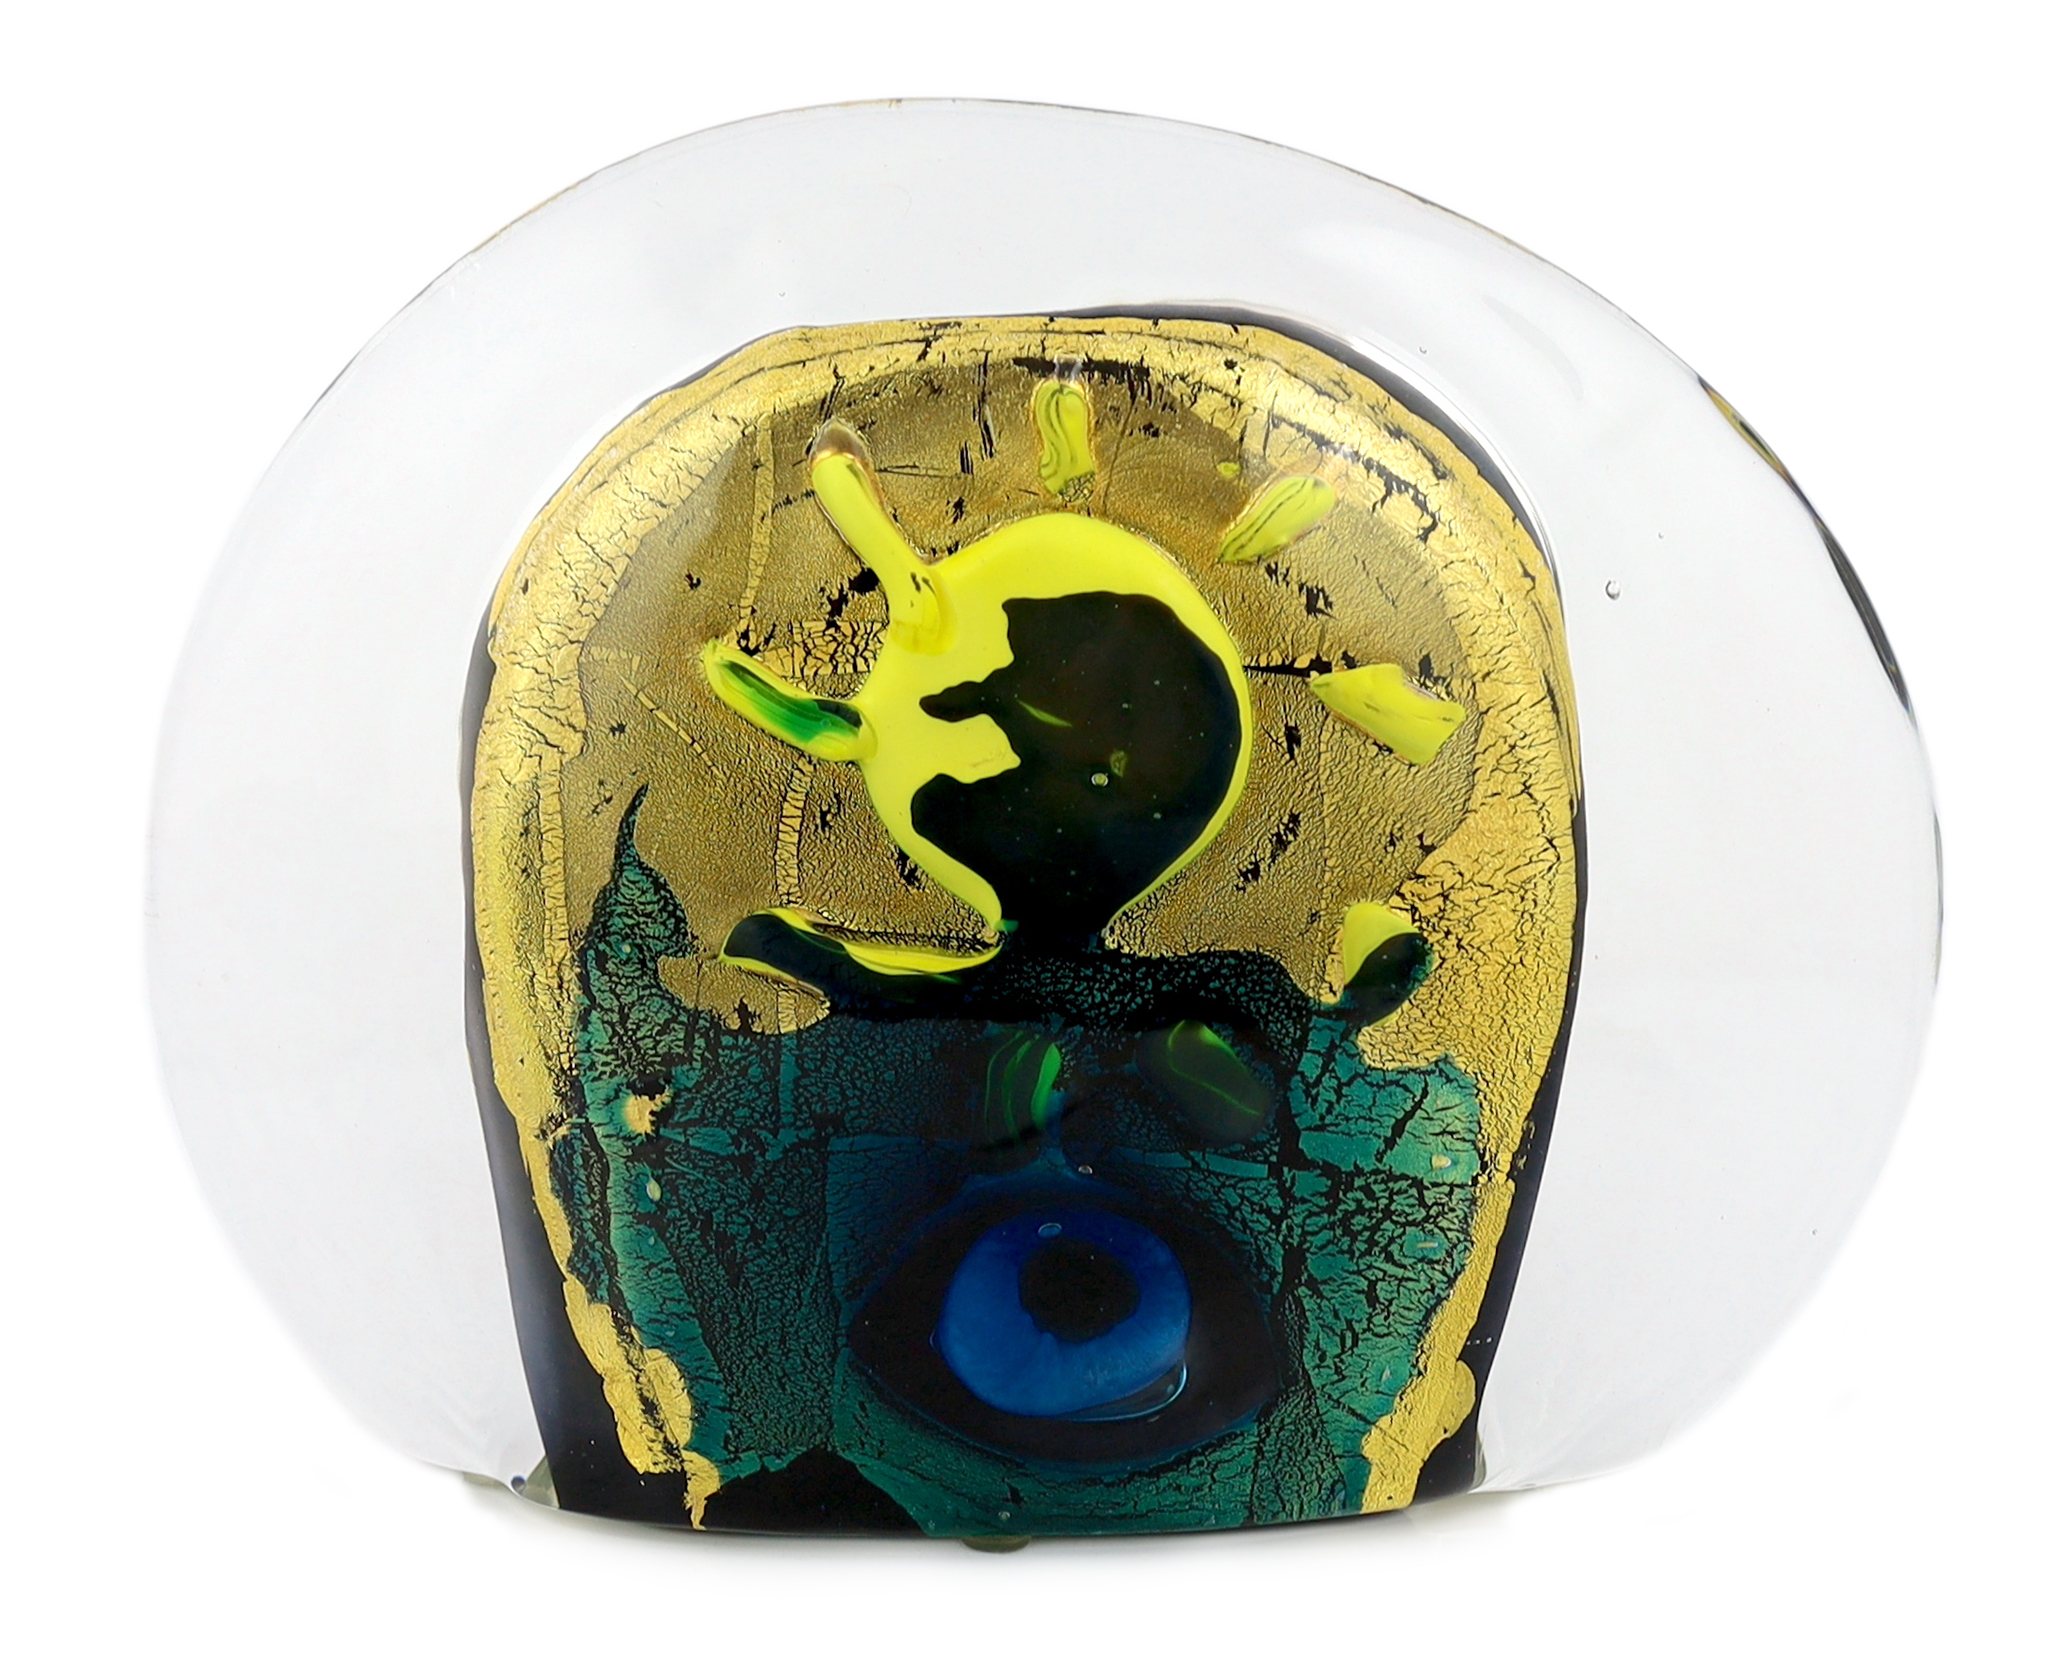 A Murano glass dome, with clear glass encasing an abstract figure                                                                                                                                                           